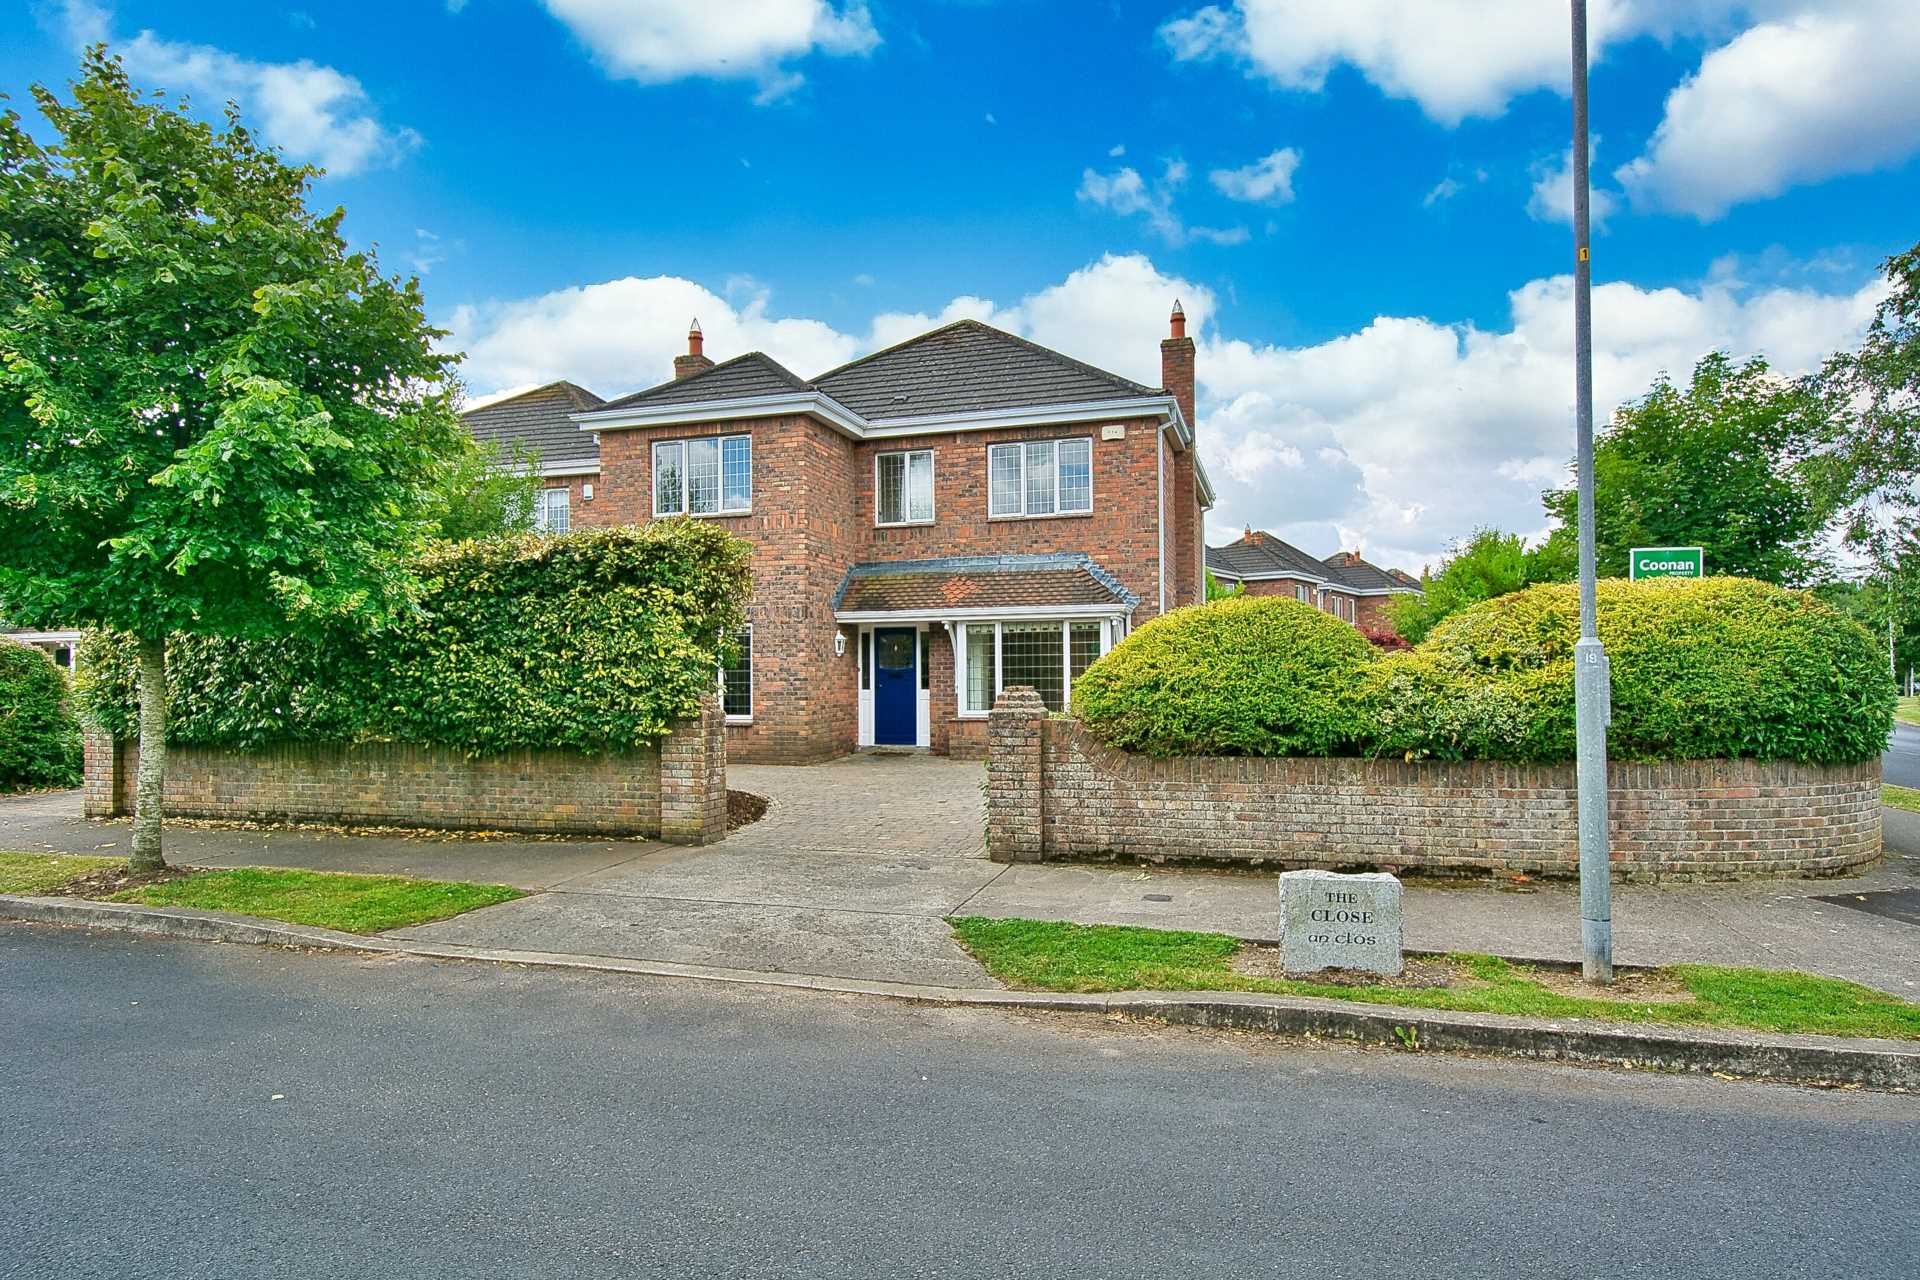 Spacious Home Not to be Overlooked in Sought After Celbridge Development